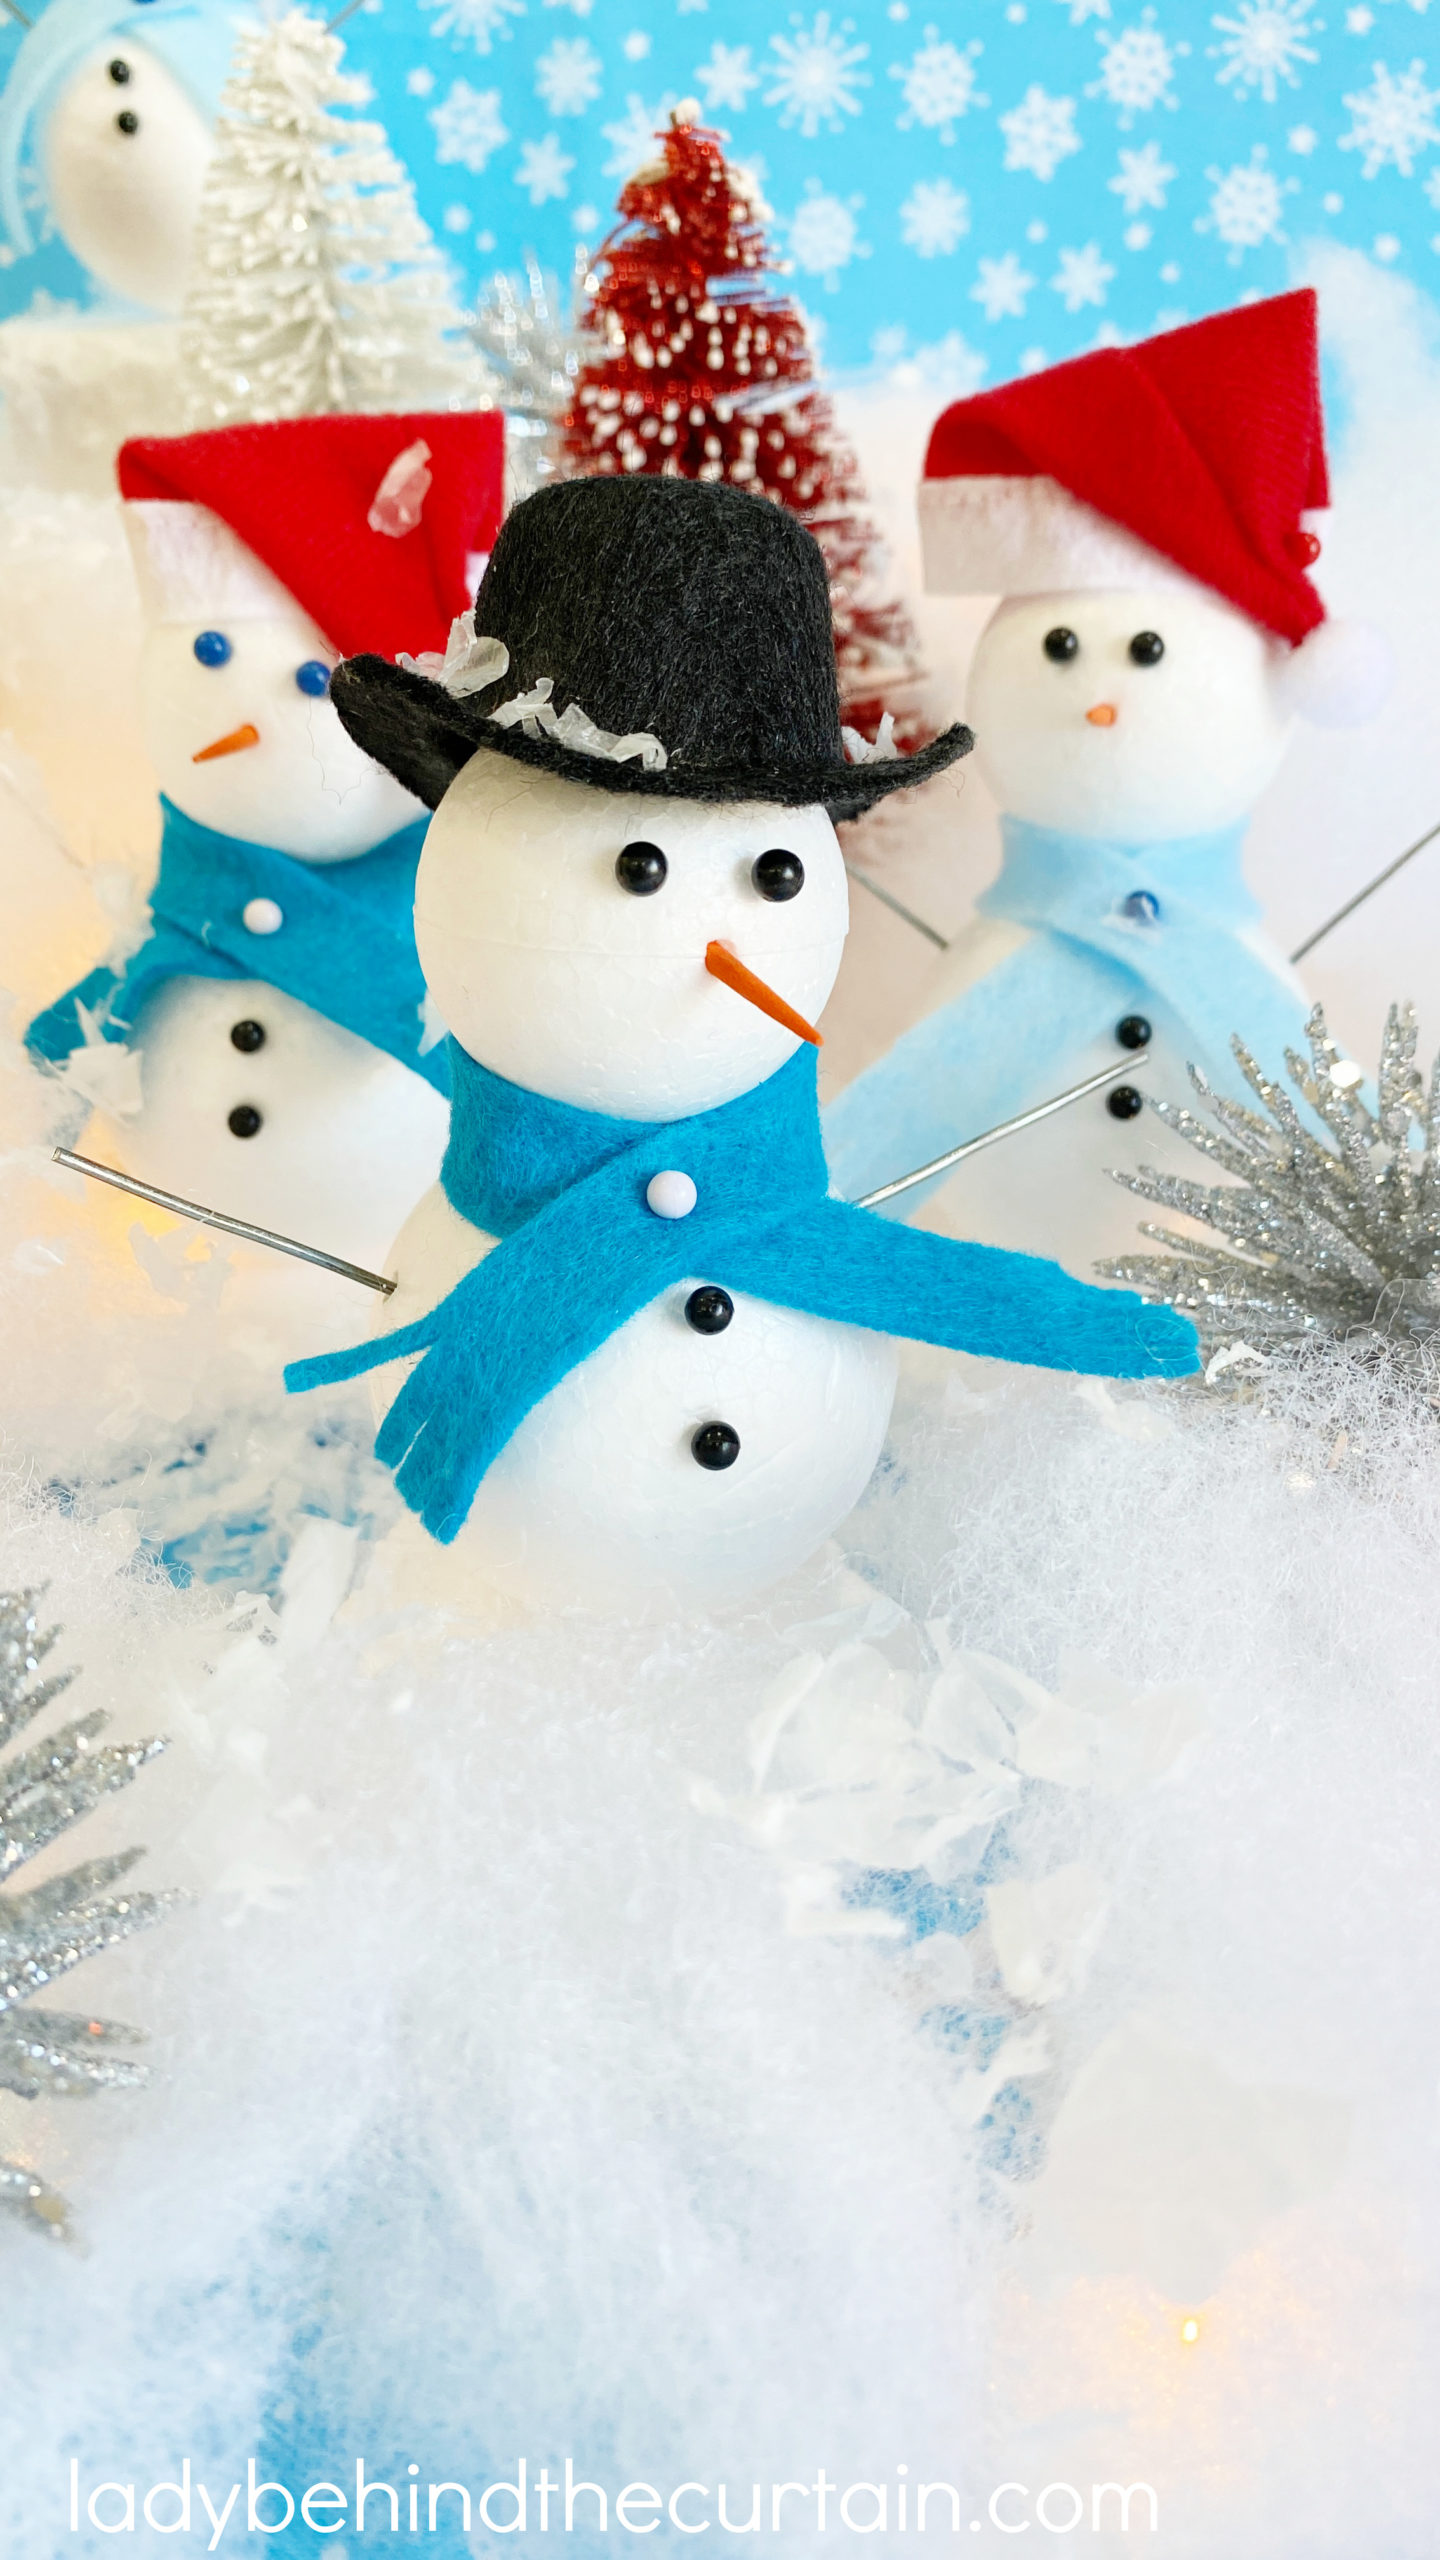 DIY Do You Want to Build a Snowman Kit Gift Idea